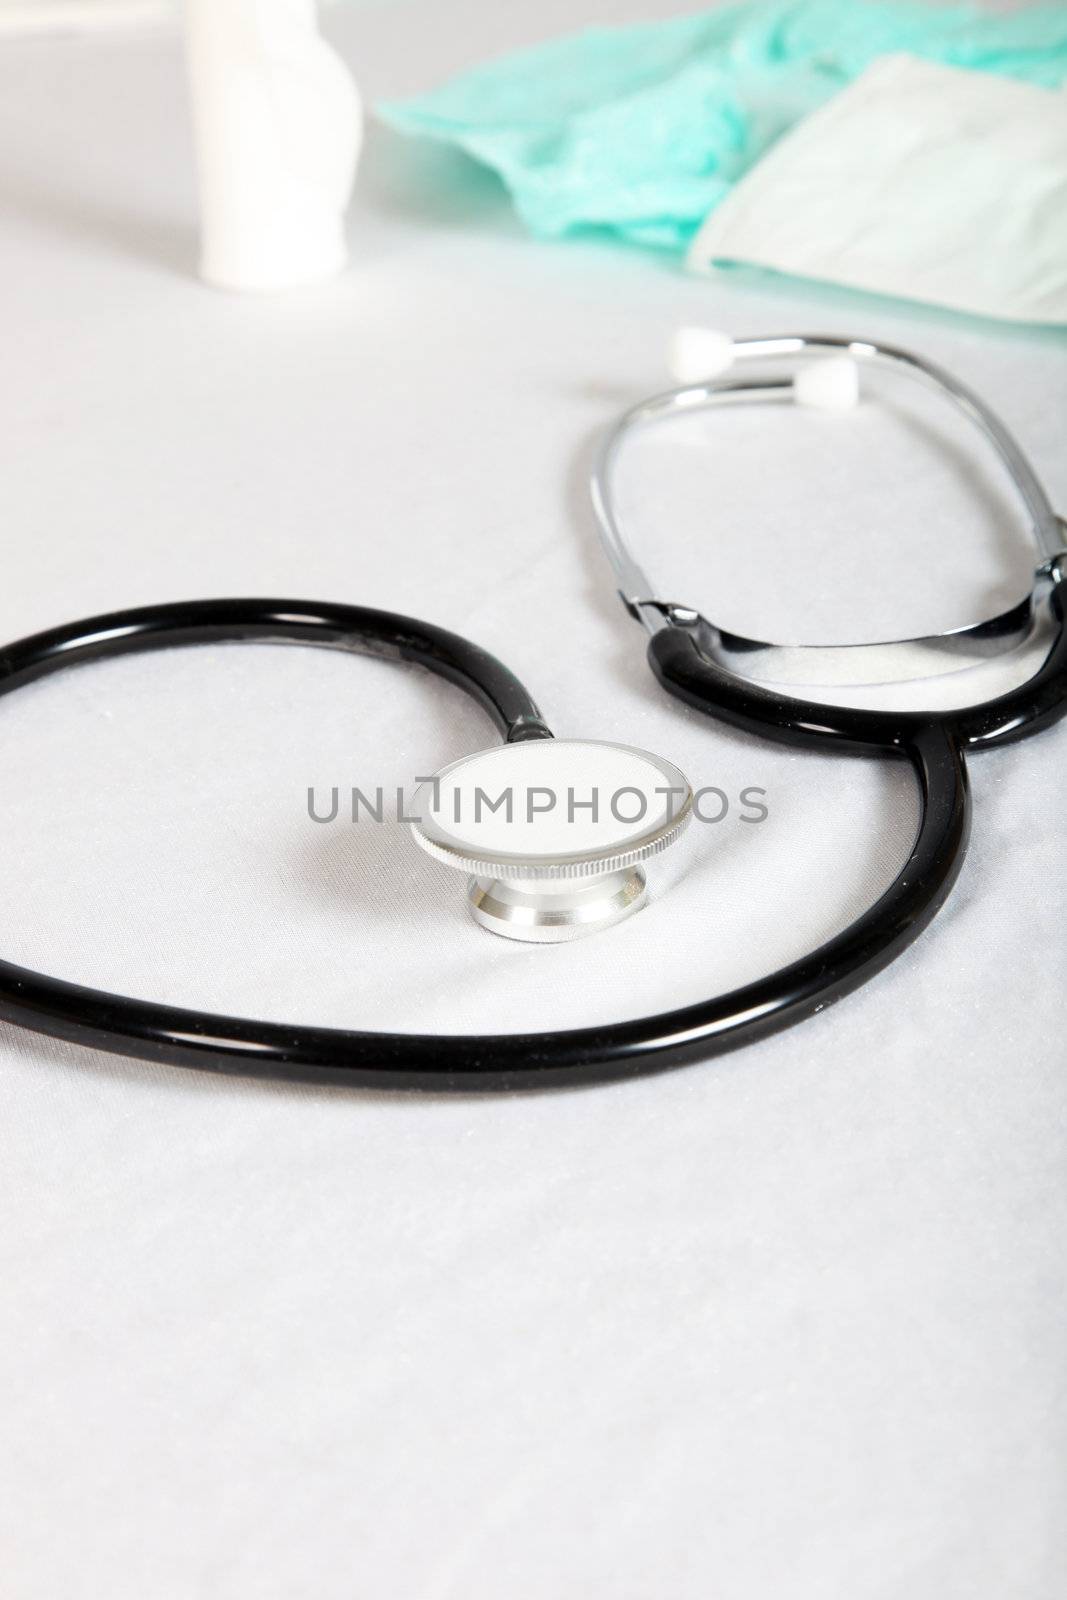 A stethoscope in the treatment room by Farina6000